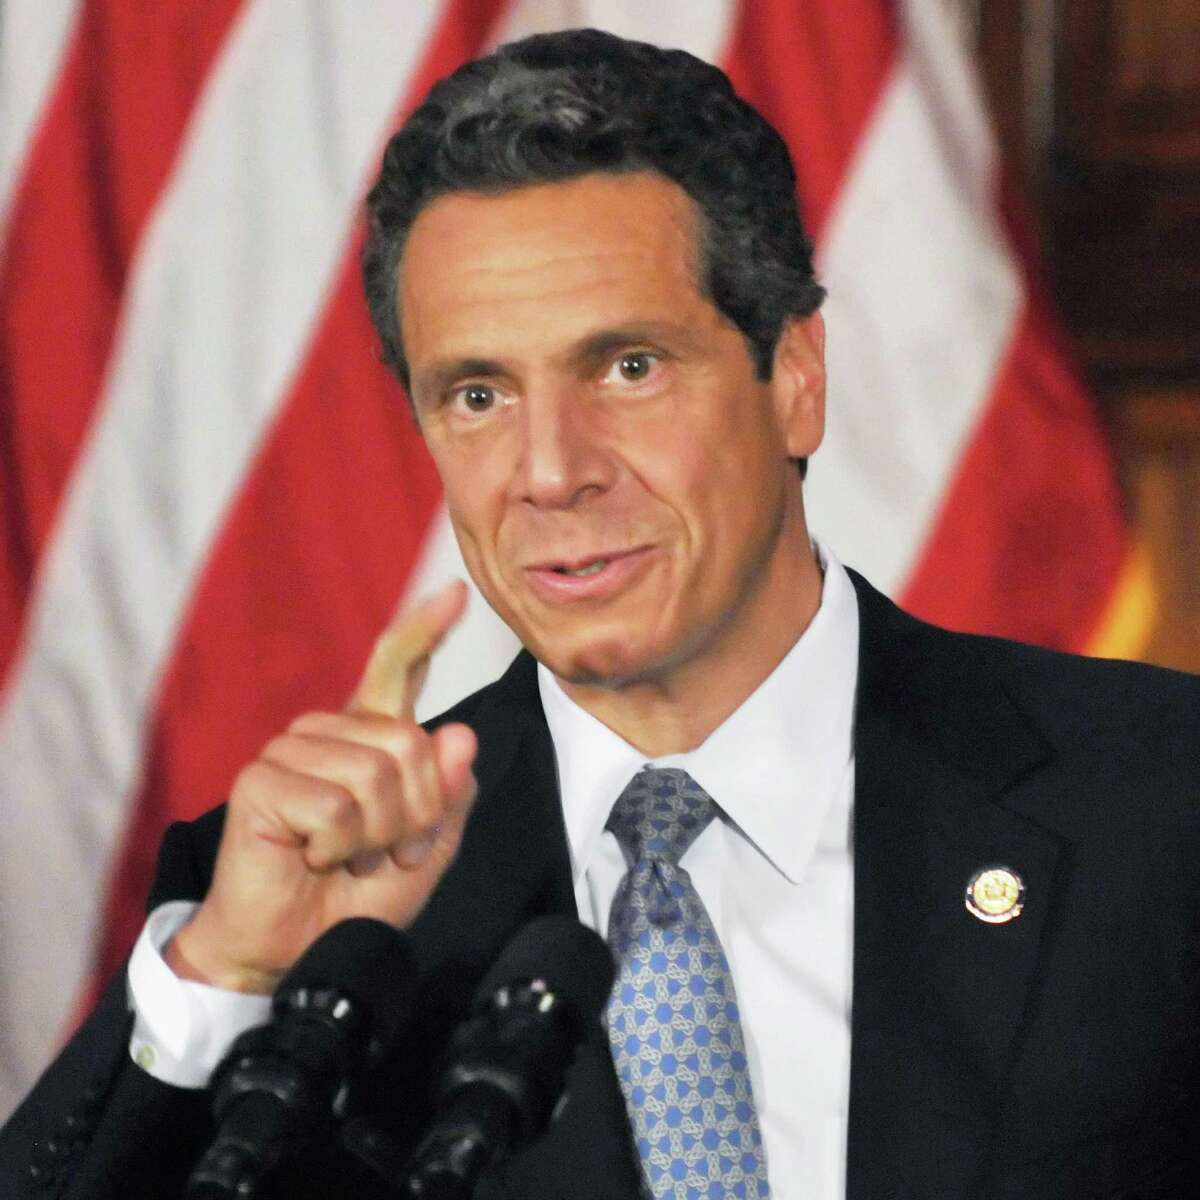 New York state Gov. Andrew Cuomo. (John Carl D'Annibale / Times Union)